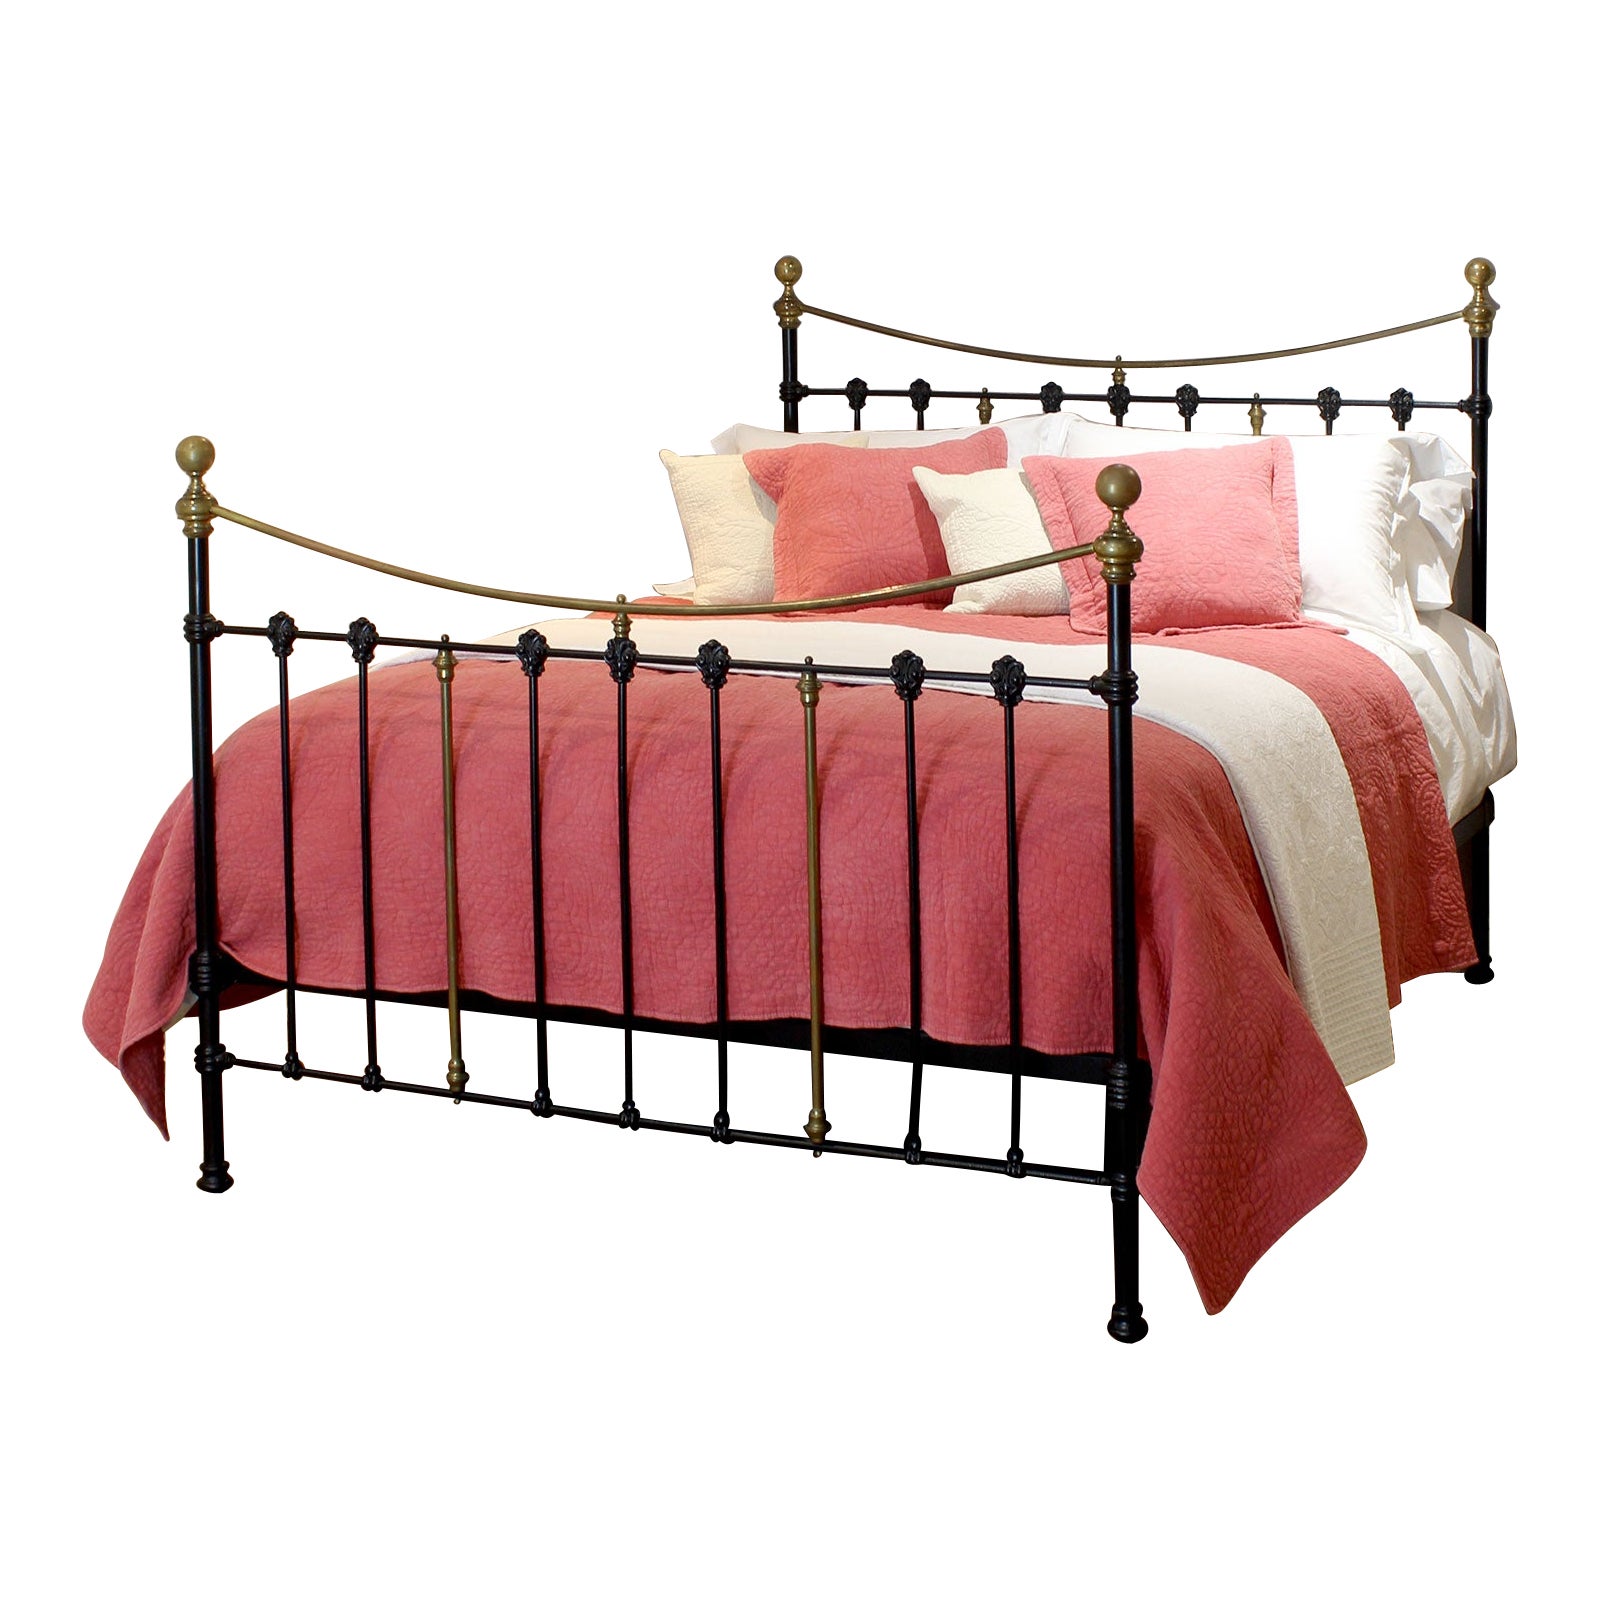 Black Antique Bed with Decorative Castings MK299